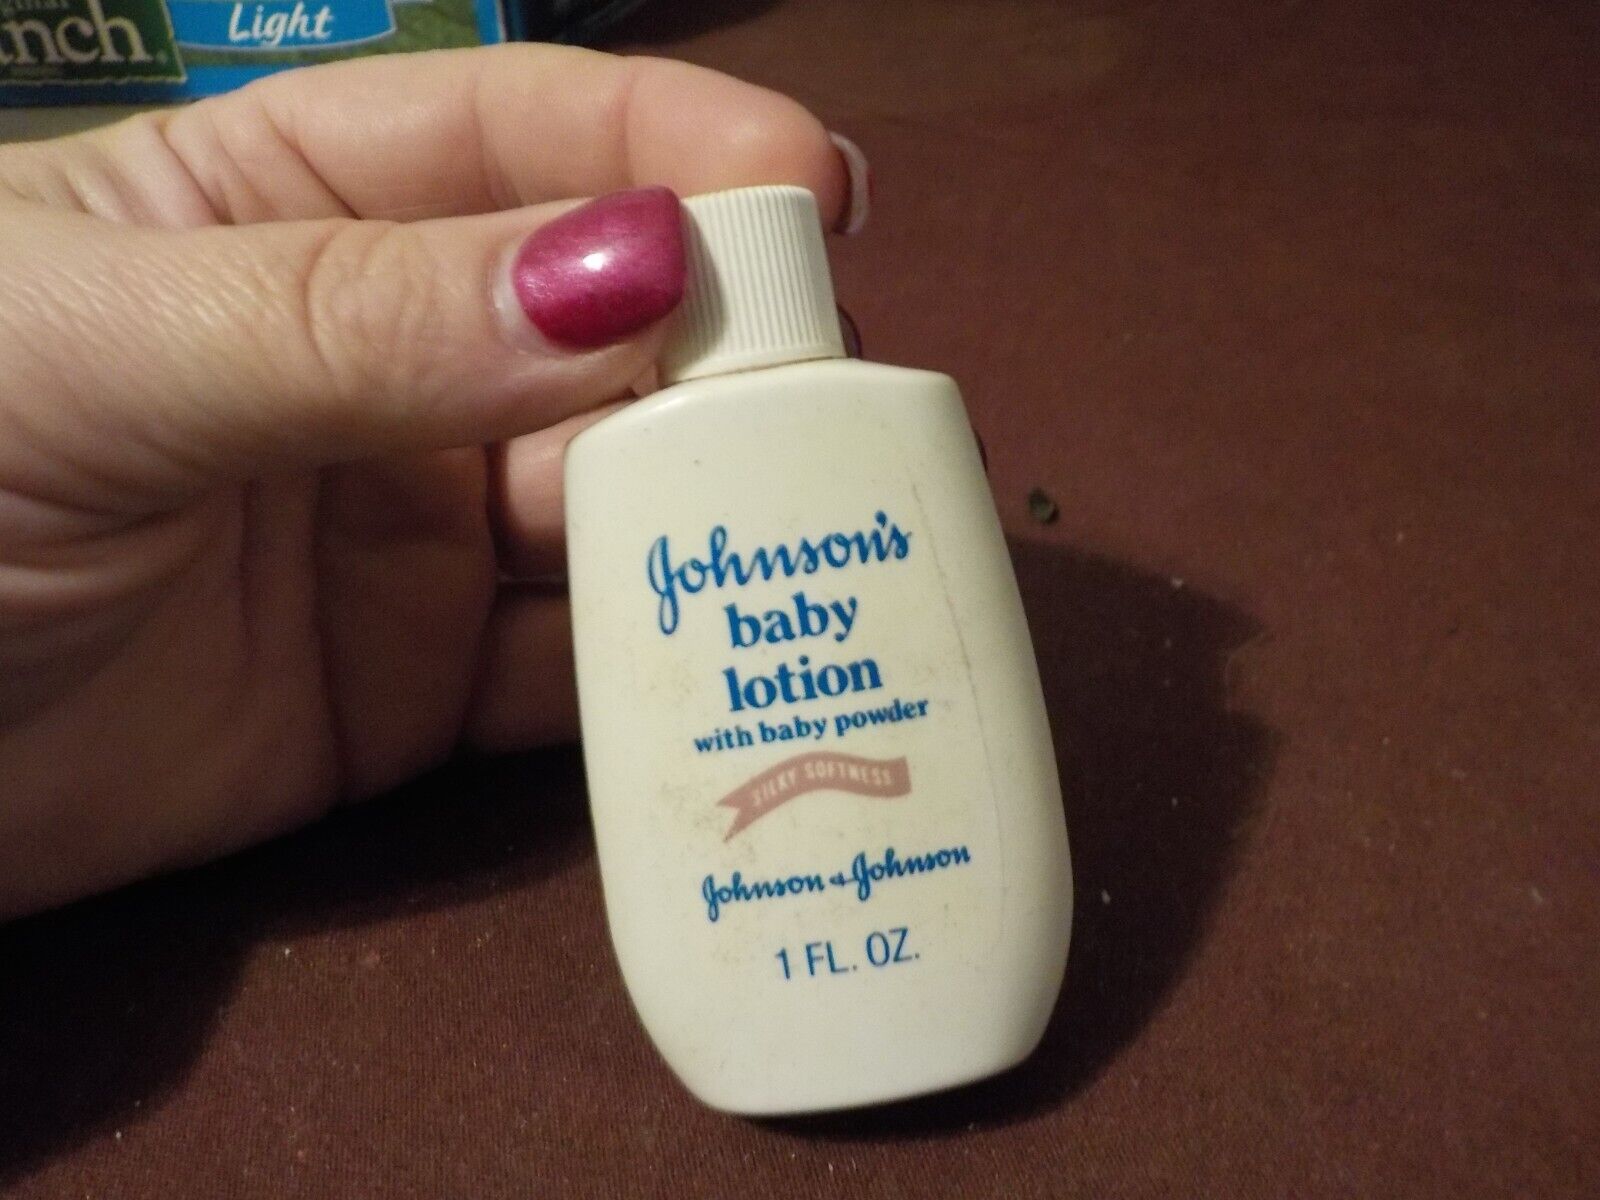 Vintage Small Travel Size Of Johnson's Baby Lotion With Baby Powder Bottle